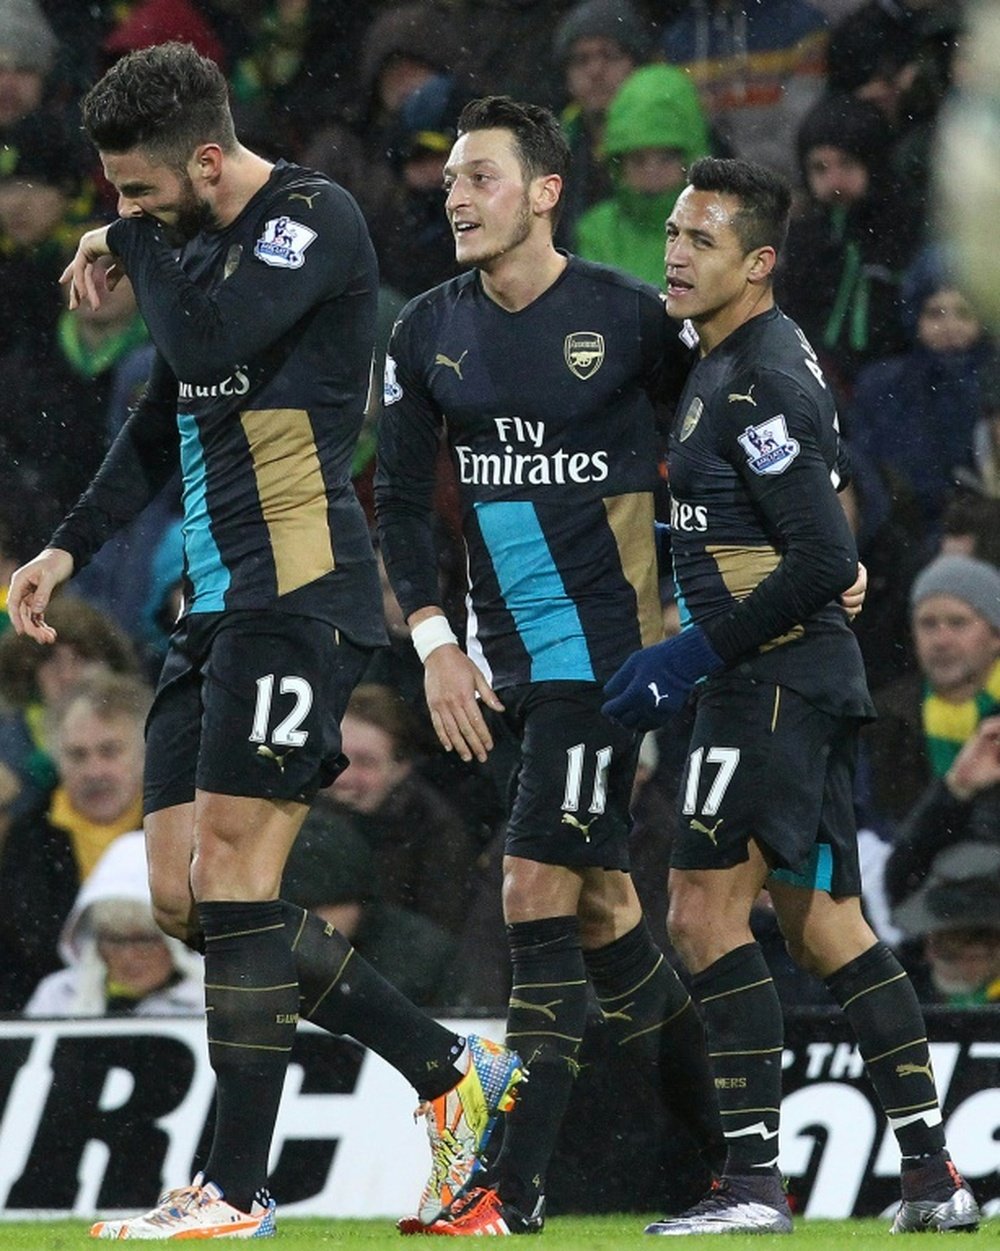 Arsenals Mesut Ozil (C) celebrates with Alexis Sanchez (R) after scoring the opening goal of the English Premier League football match between Norwich City and Arsenal at Carrow Road in Norwich, eastern England on November 29, 2015